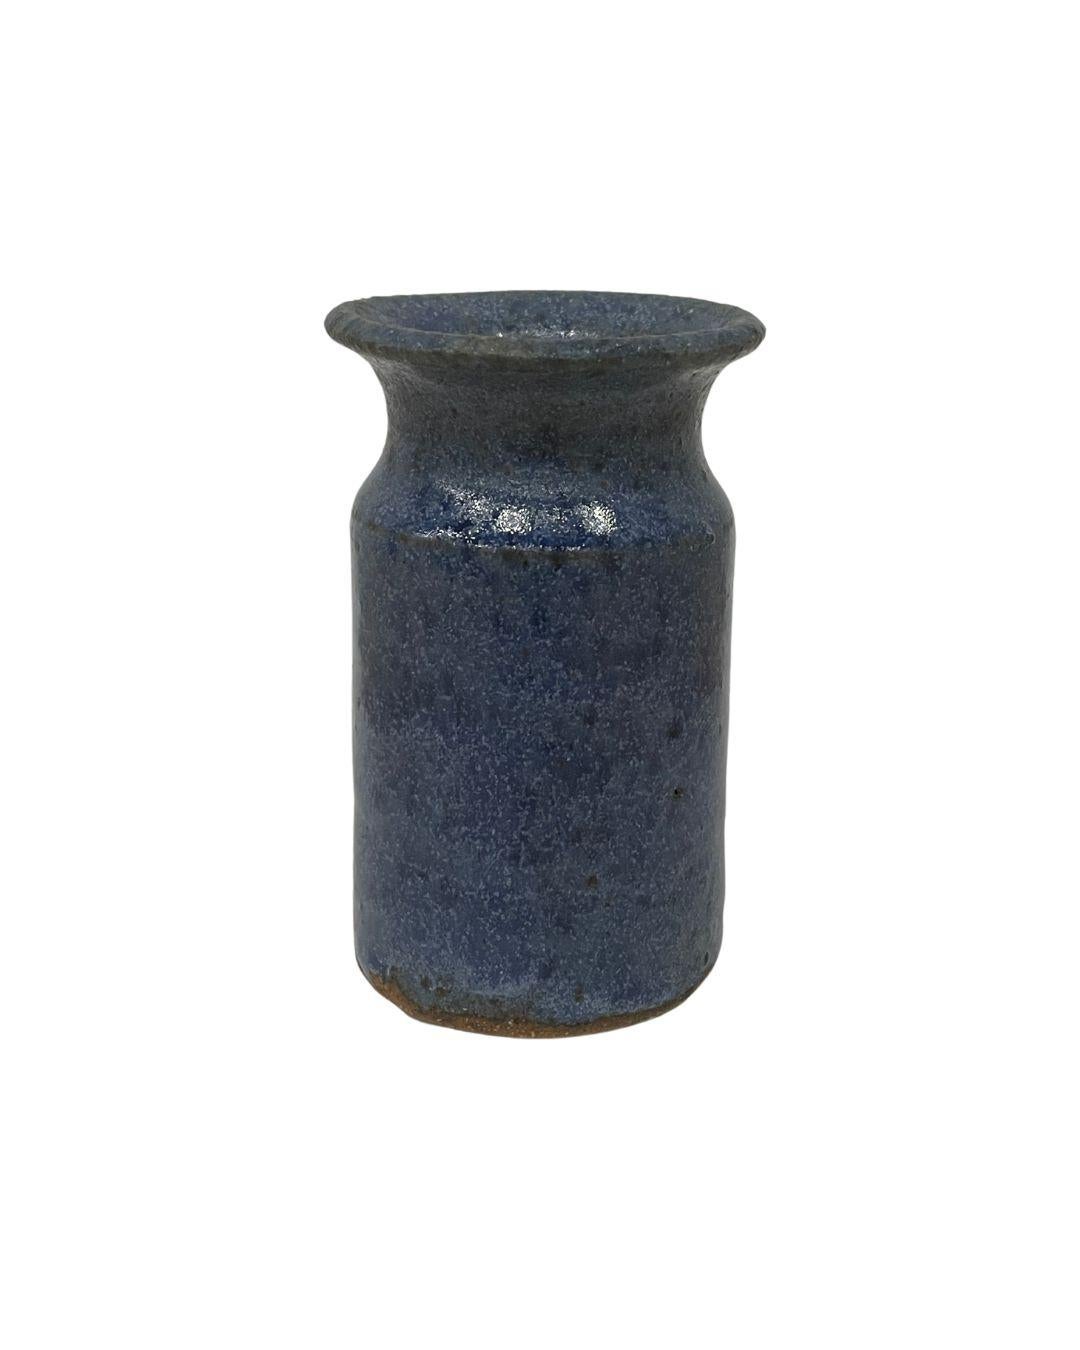 Set of three blue speckle-glazed miniature pottery vases. The variegated matte glaze on these vintage pieces imparts the color of a well-worn pair of denim jeans. 

Dimensions: Each vase measures approximately 3.25